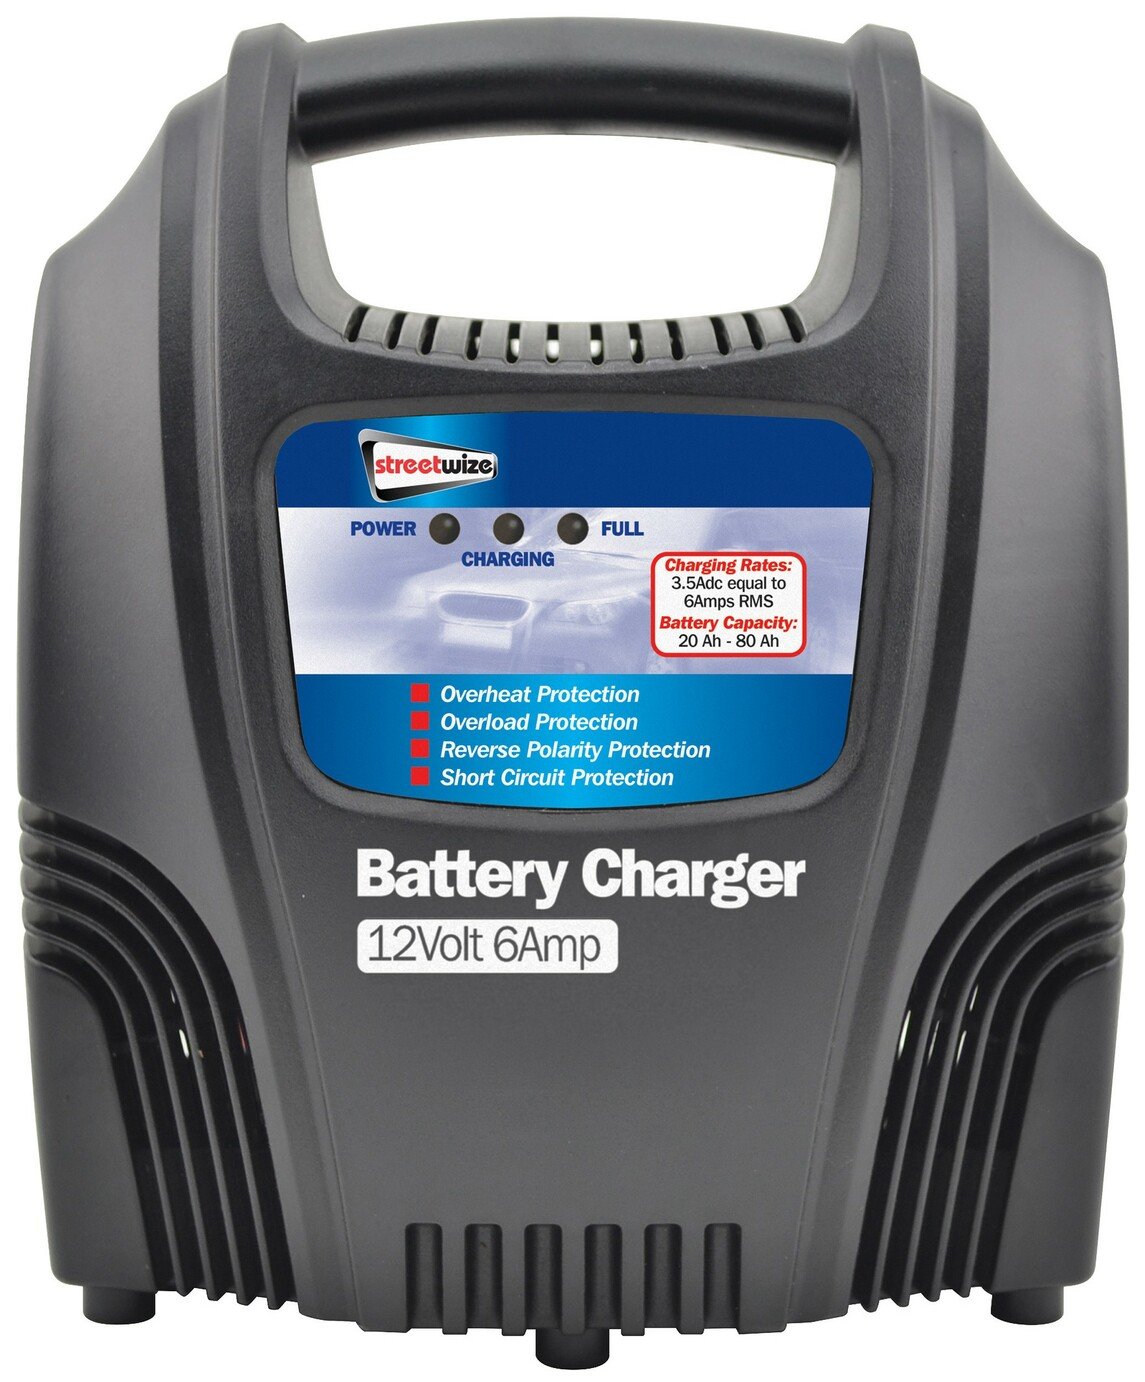 Streetwize 6 Amp 12V Compact Battery Charger Review